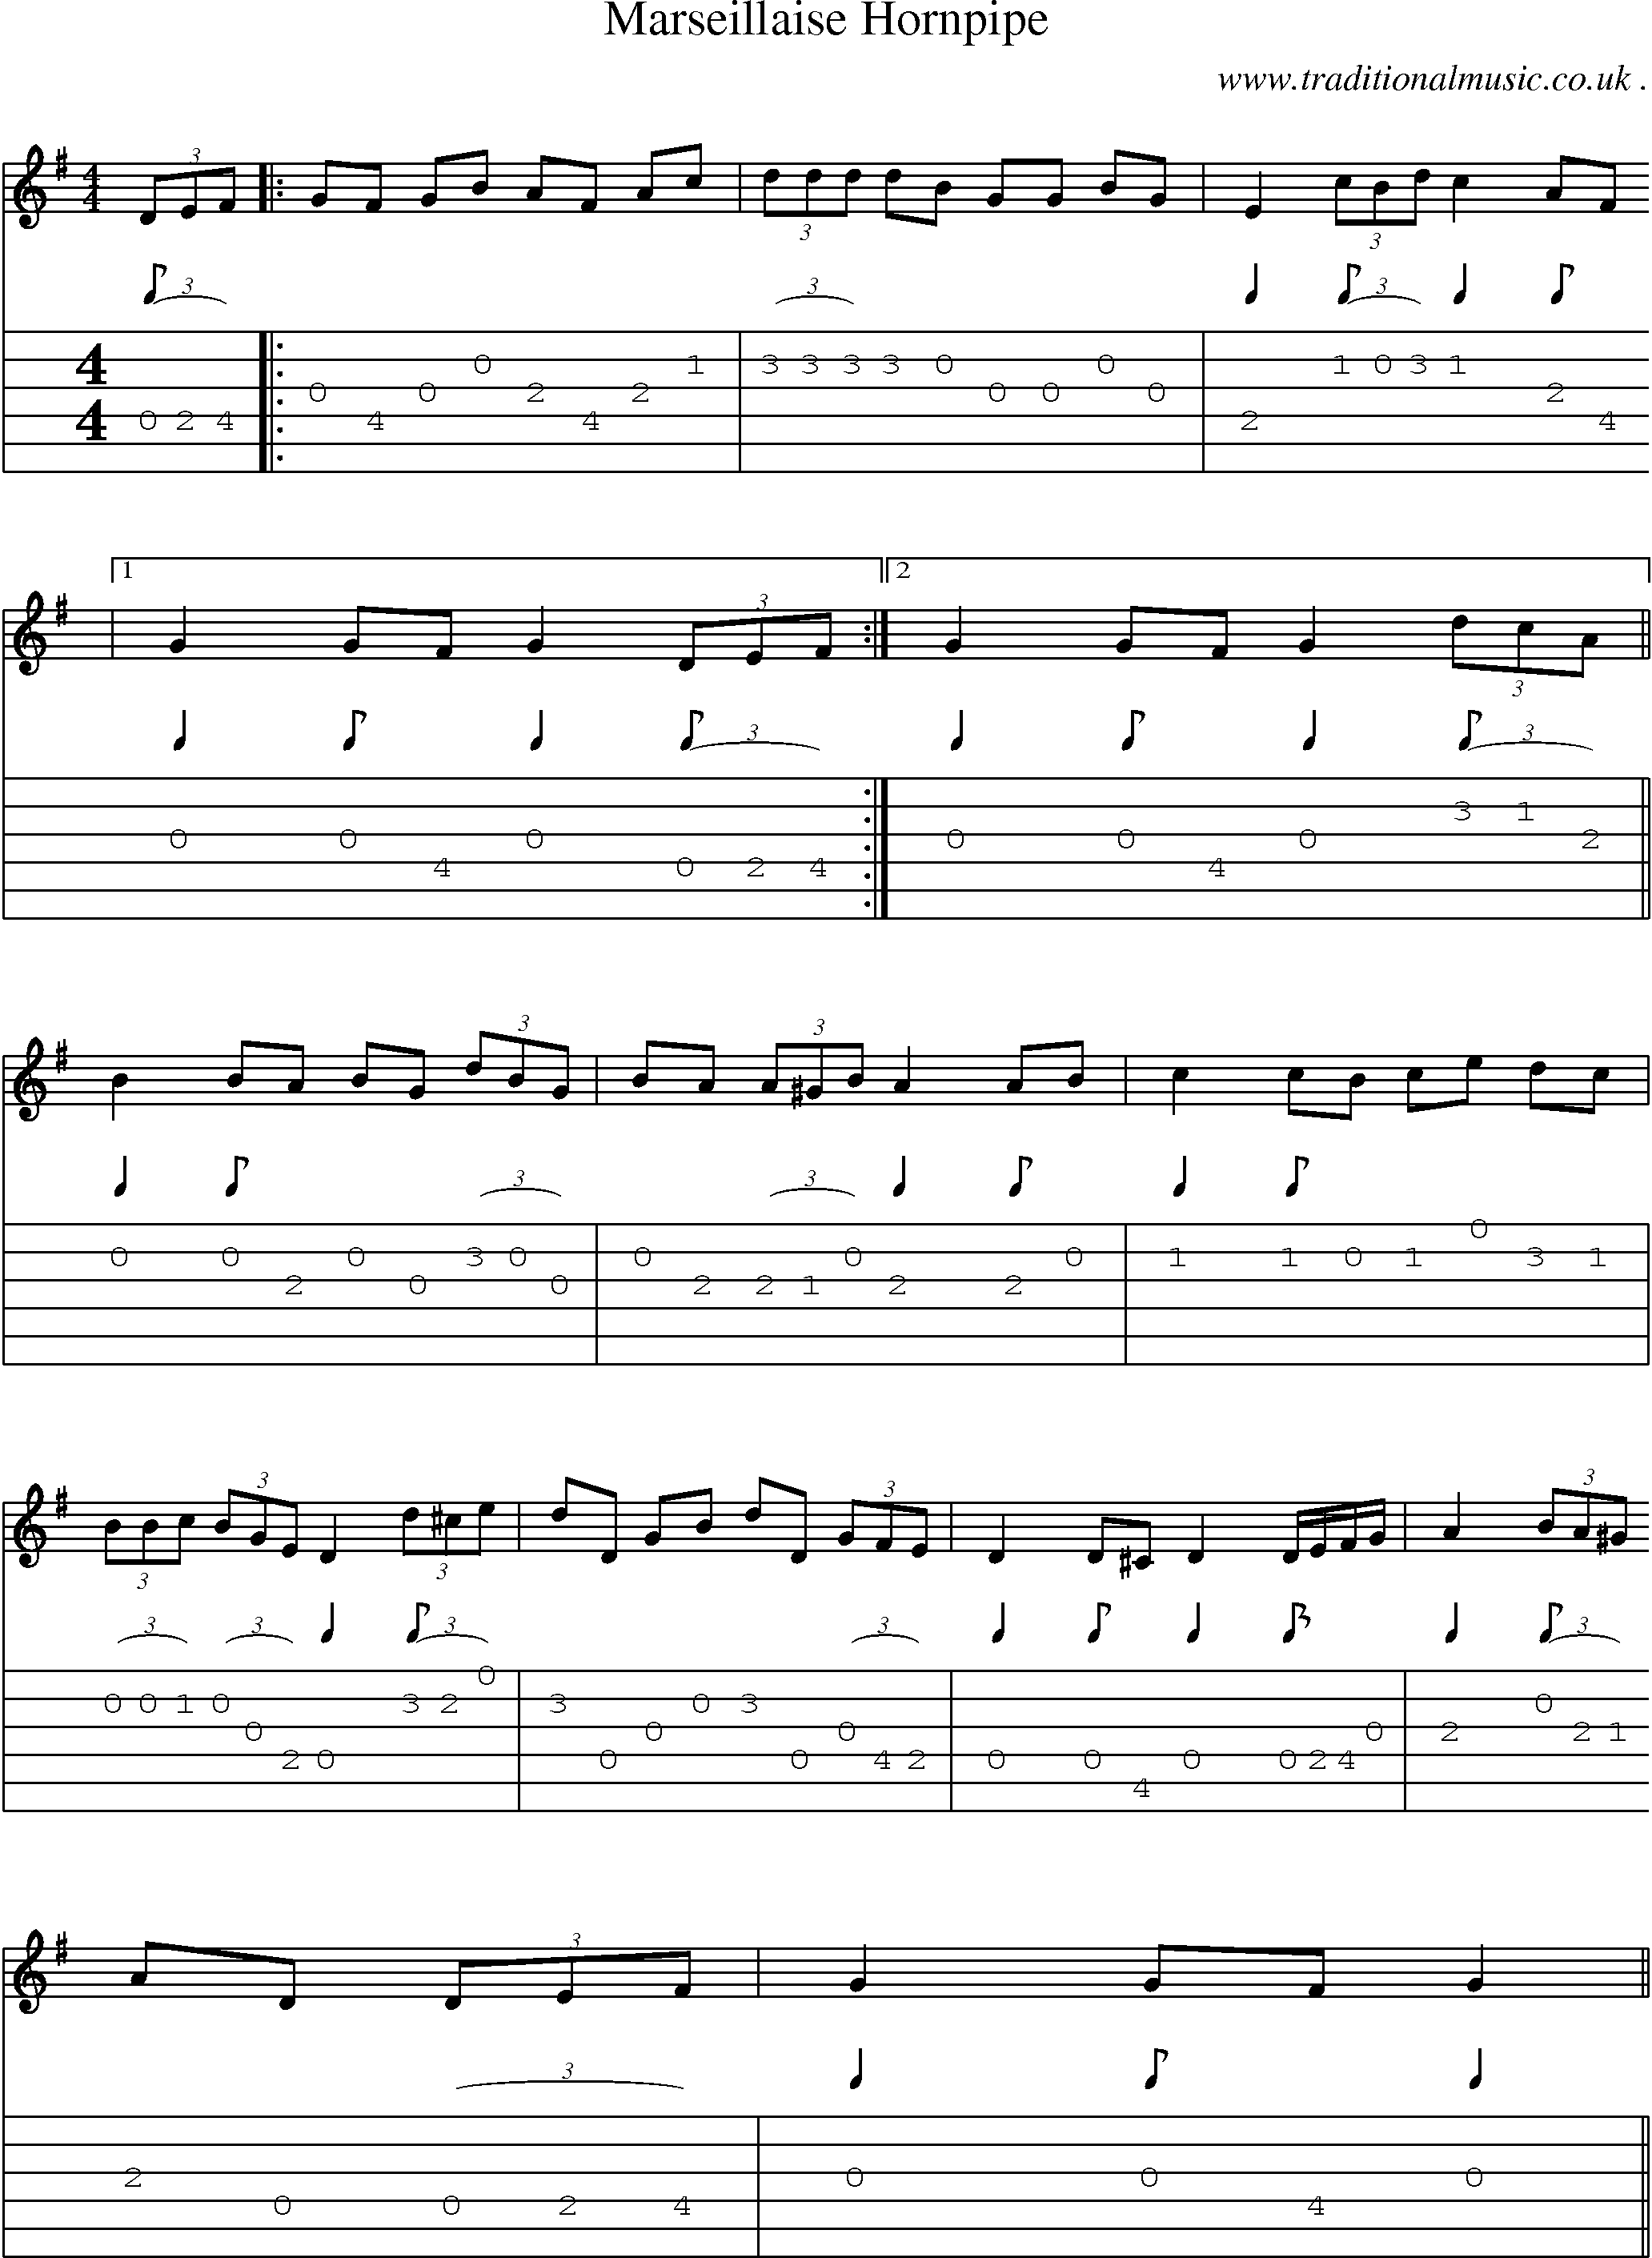 Sheet-Music and Guitar Tabs for Marseillaise Hornpipe